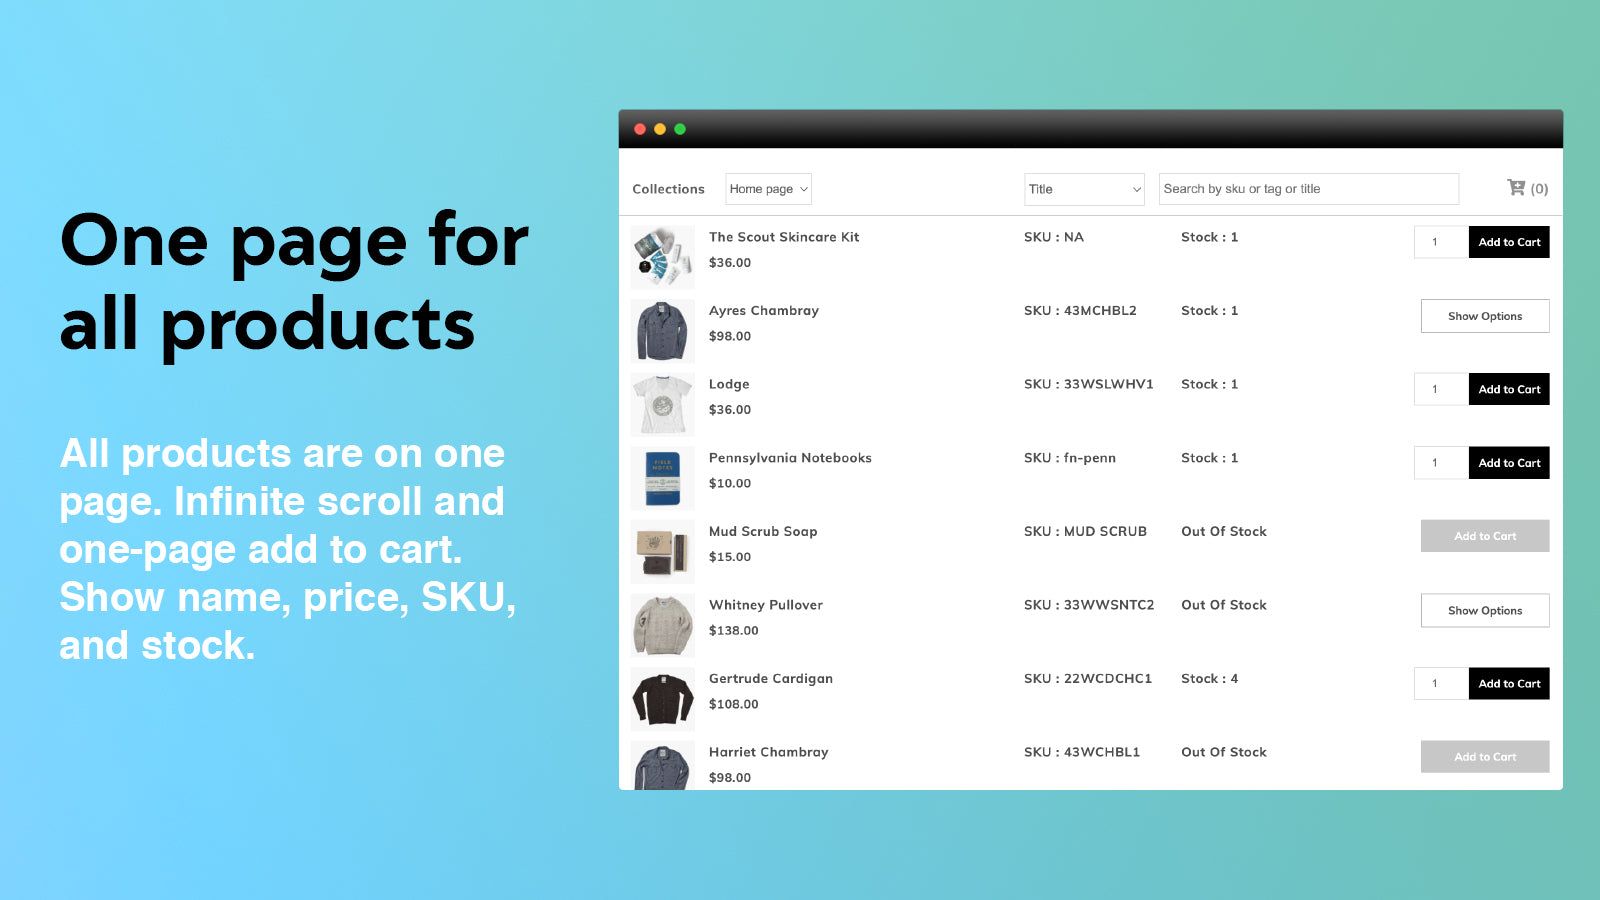 Show all products on one page